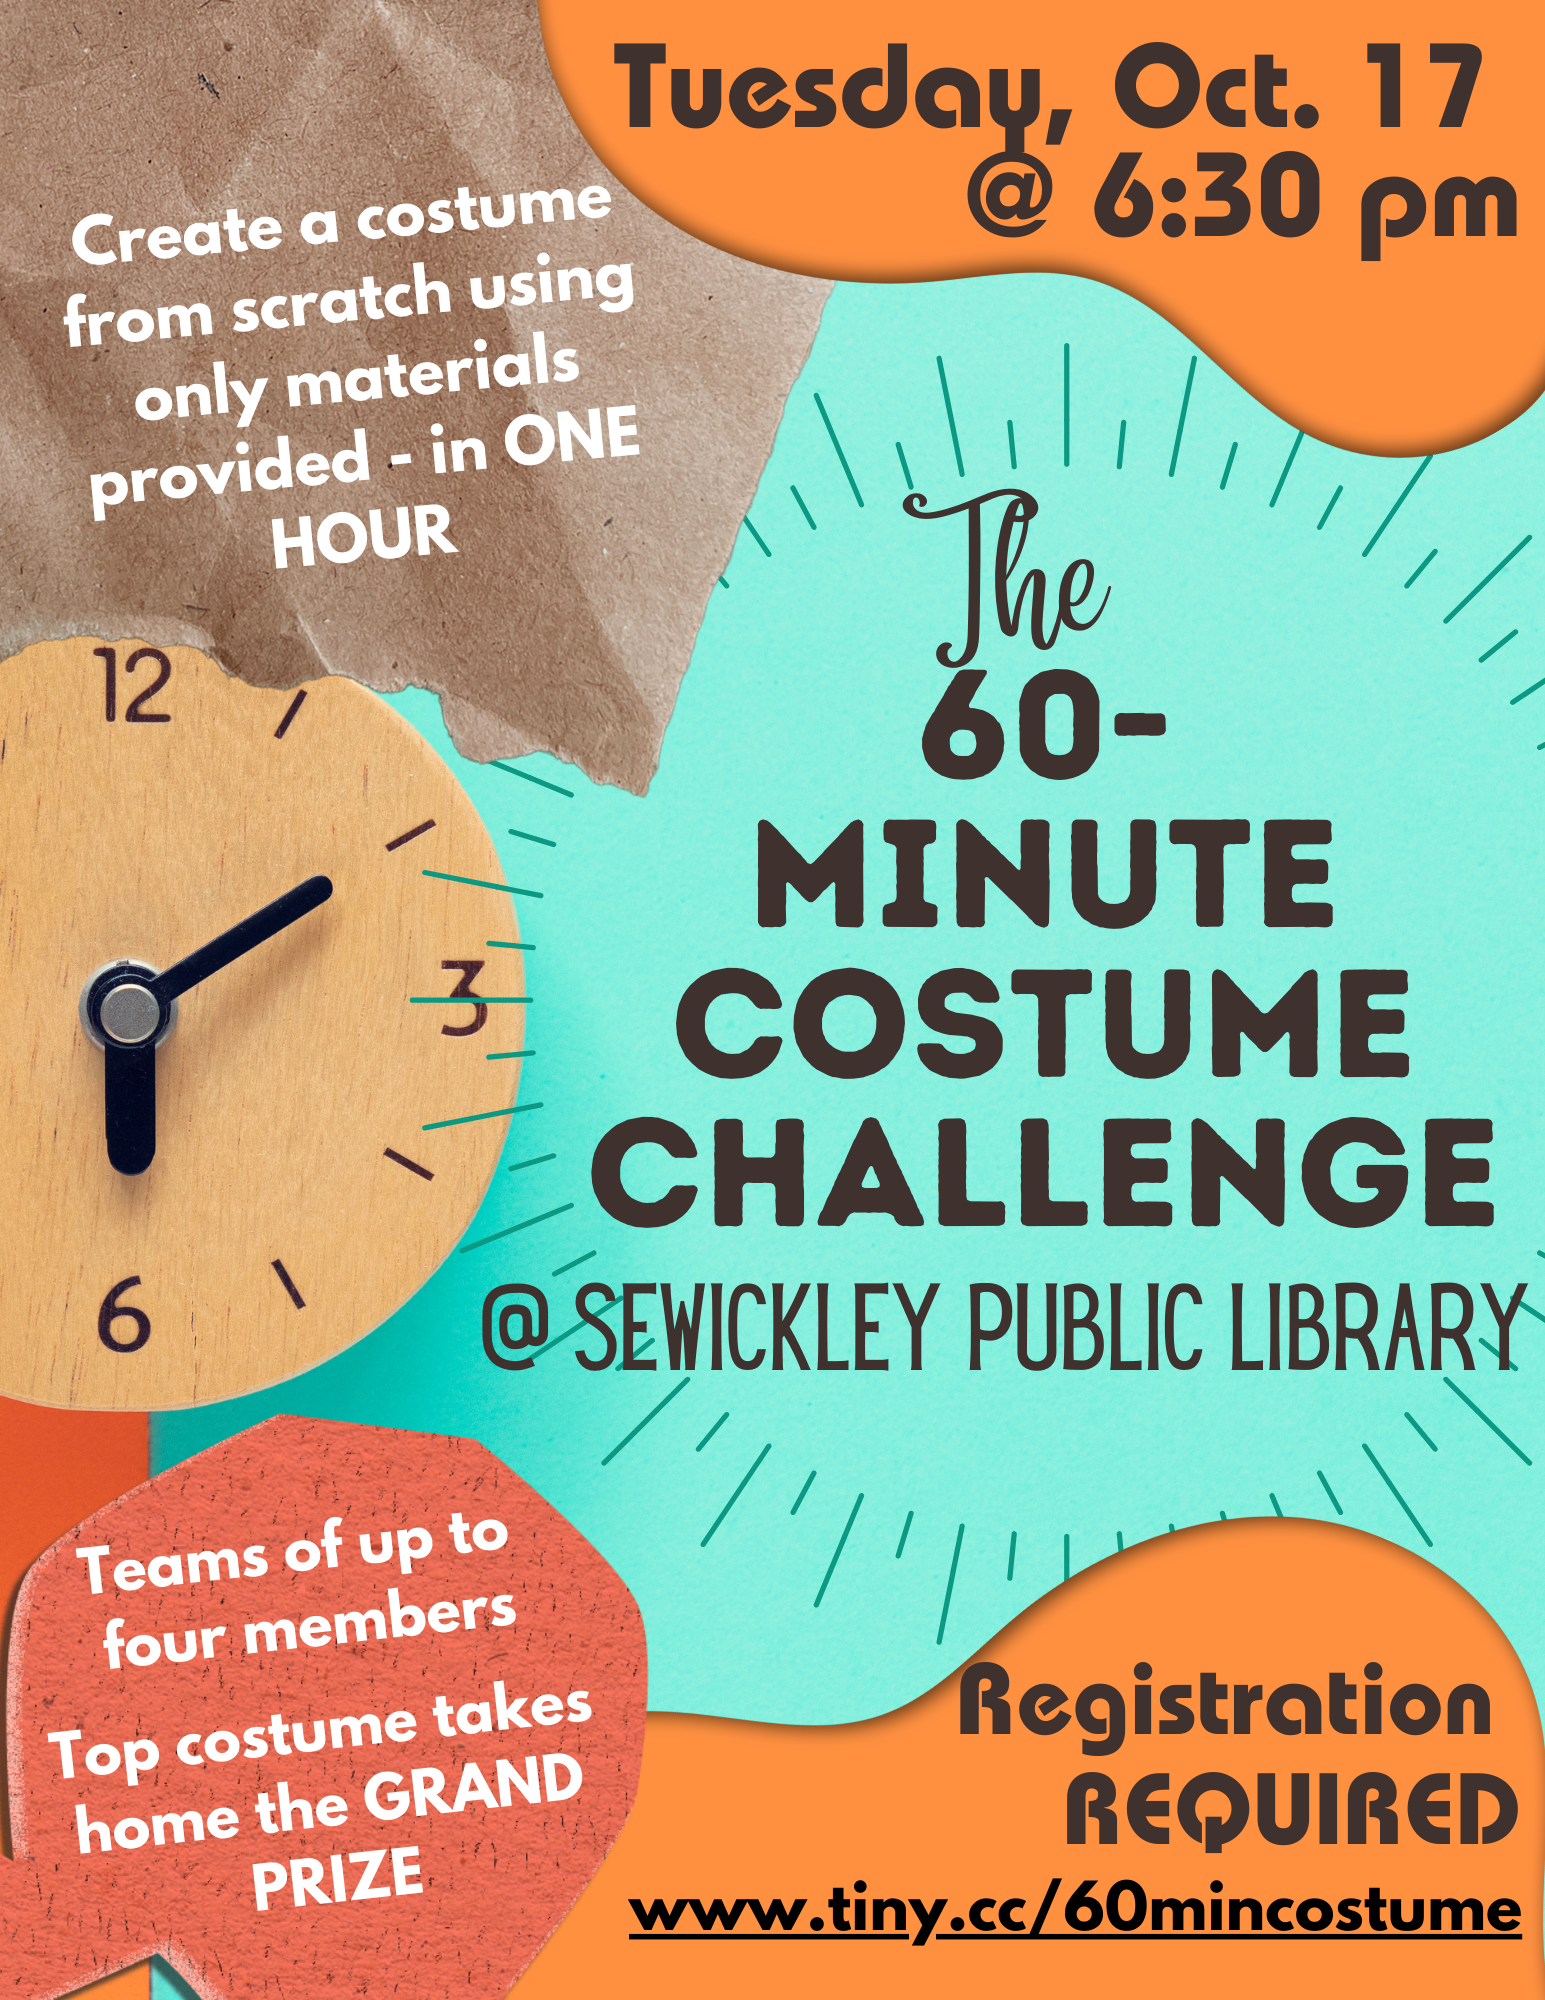 Flier for 60 Minute Costume Challenge featuring a clock and information about the program on October 17